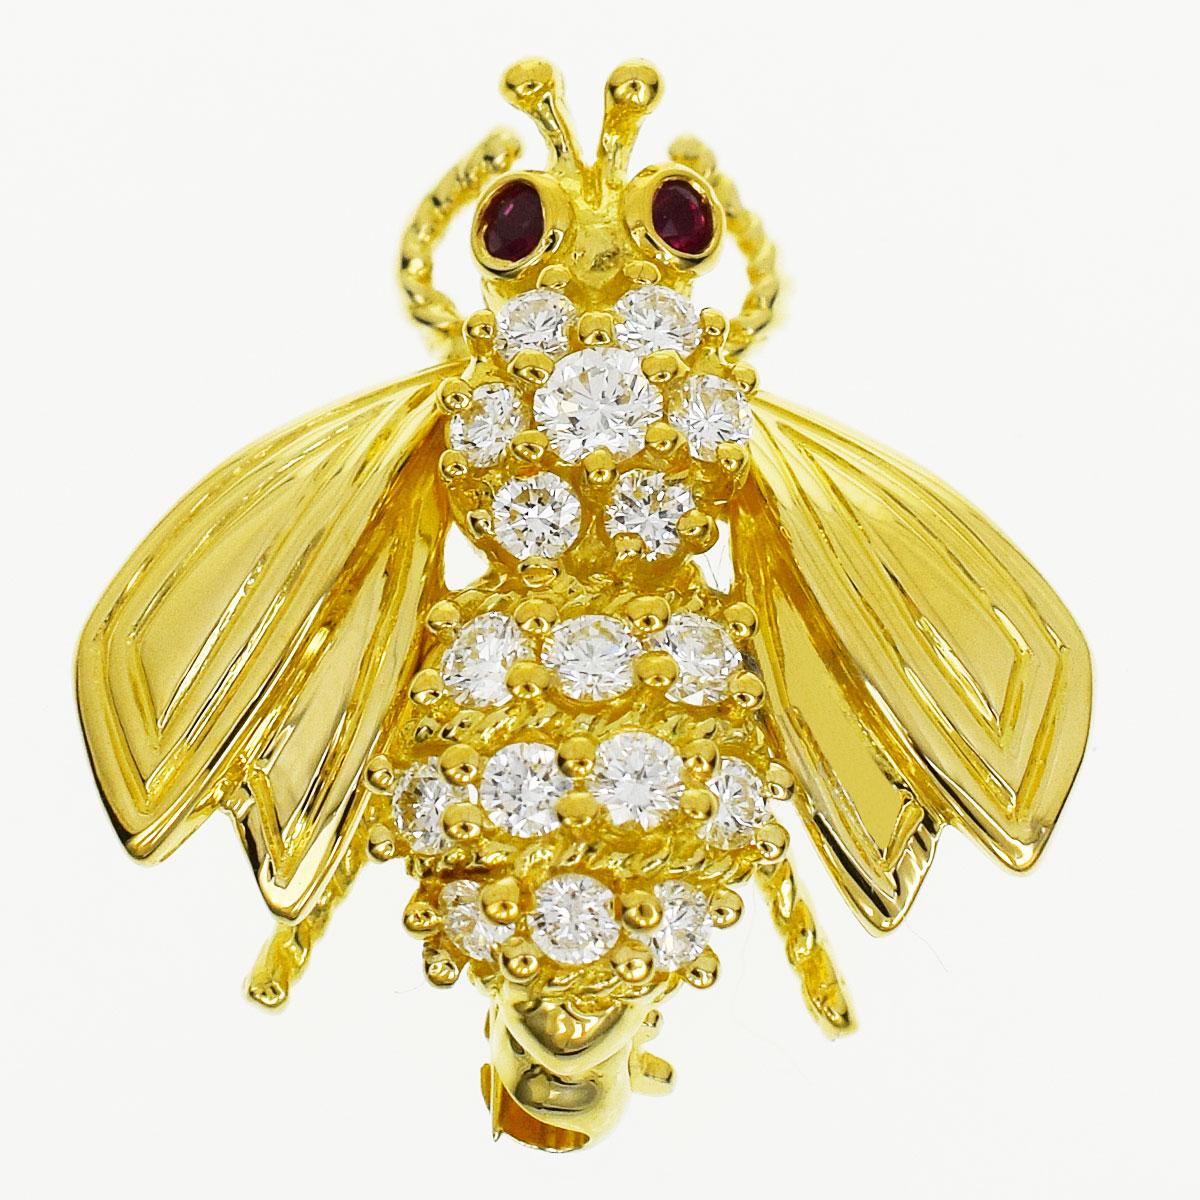 Brand:TIFFANY&Co
Name:Bee brooch
Material:17P diamond, 2P ruby, 750 K18 YG yellow gold
Weight:5.2g （Approx)
Size（inch）:H19.67mm×W18.78mm / H0.77in×W0.73in（Approx)
Comes with:Tiffany box, case